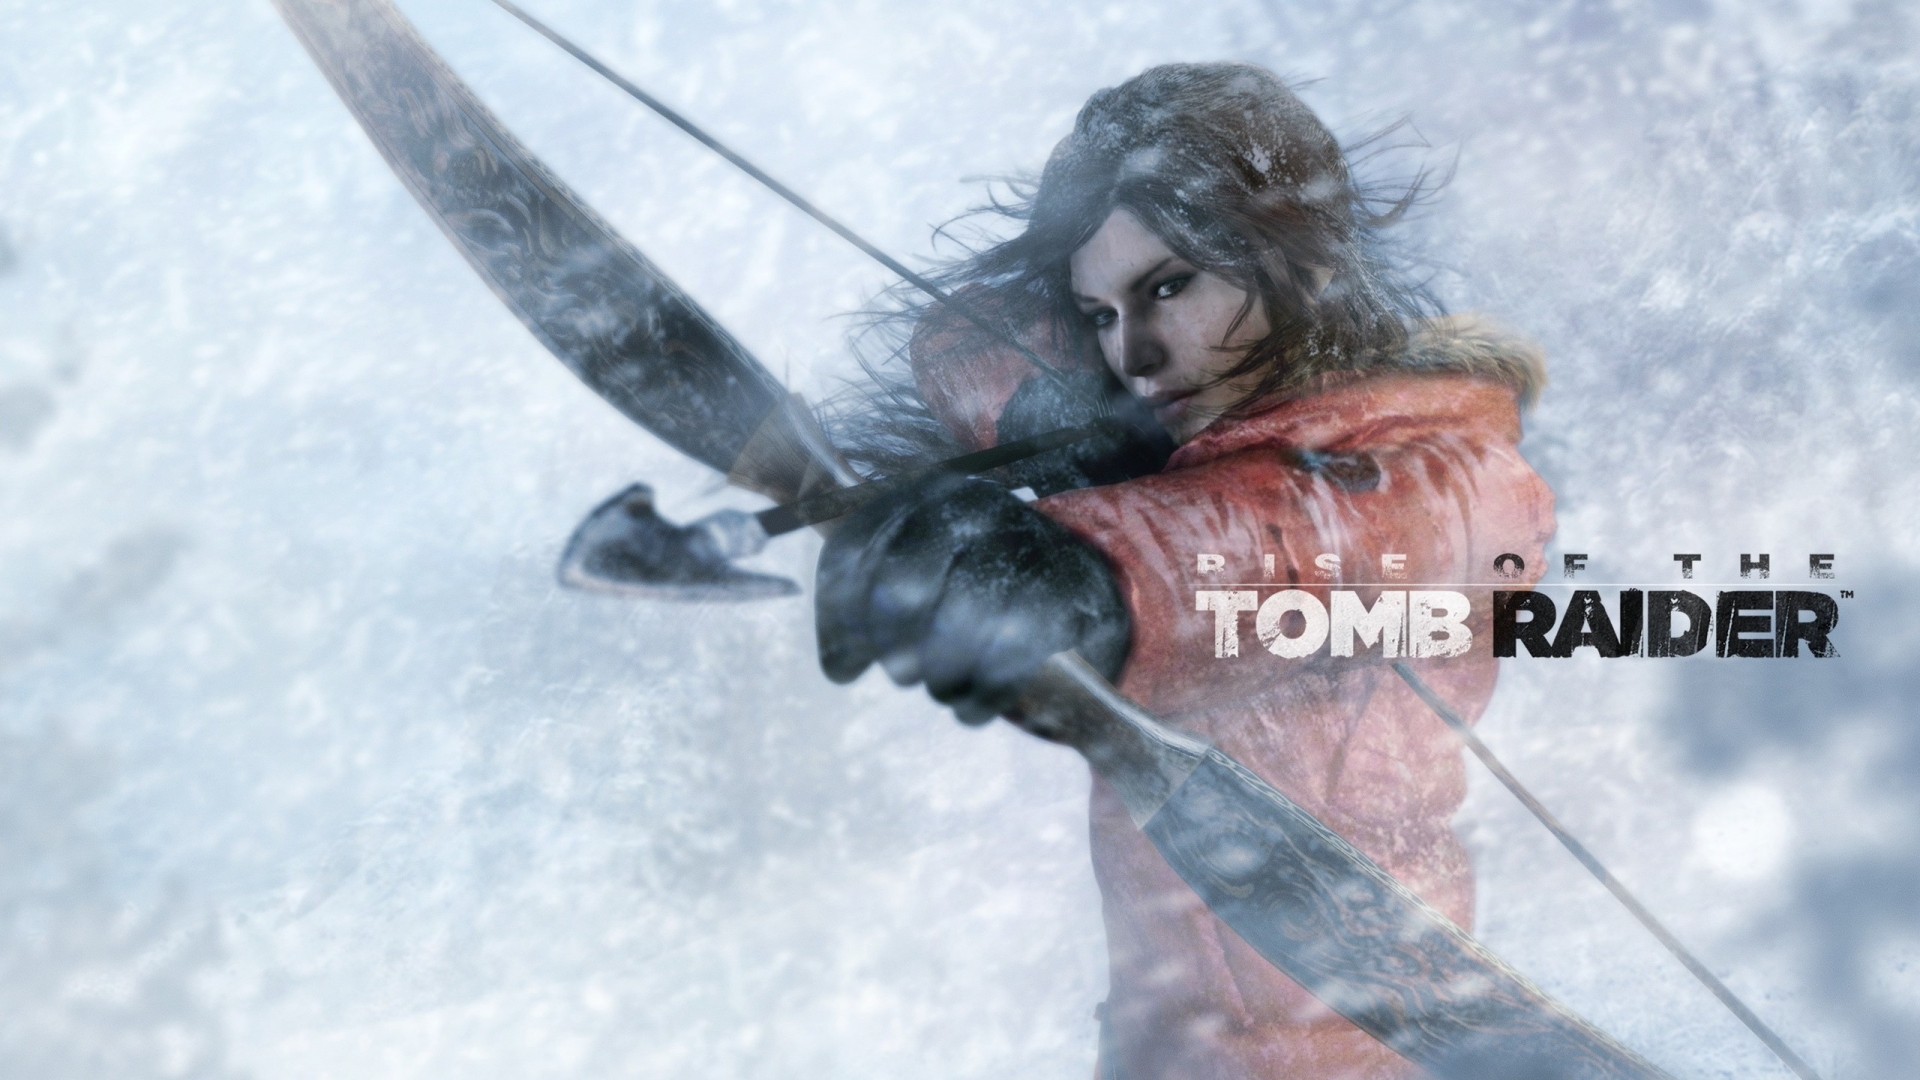 Lara Croft Rise of The Tomb Raider Bow and Arrow for 1920 x 1080 HDTV 1080p resolution